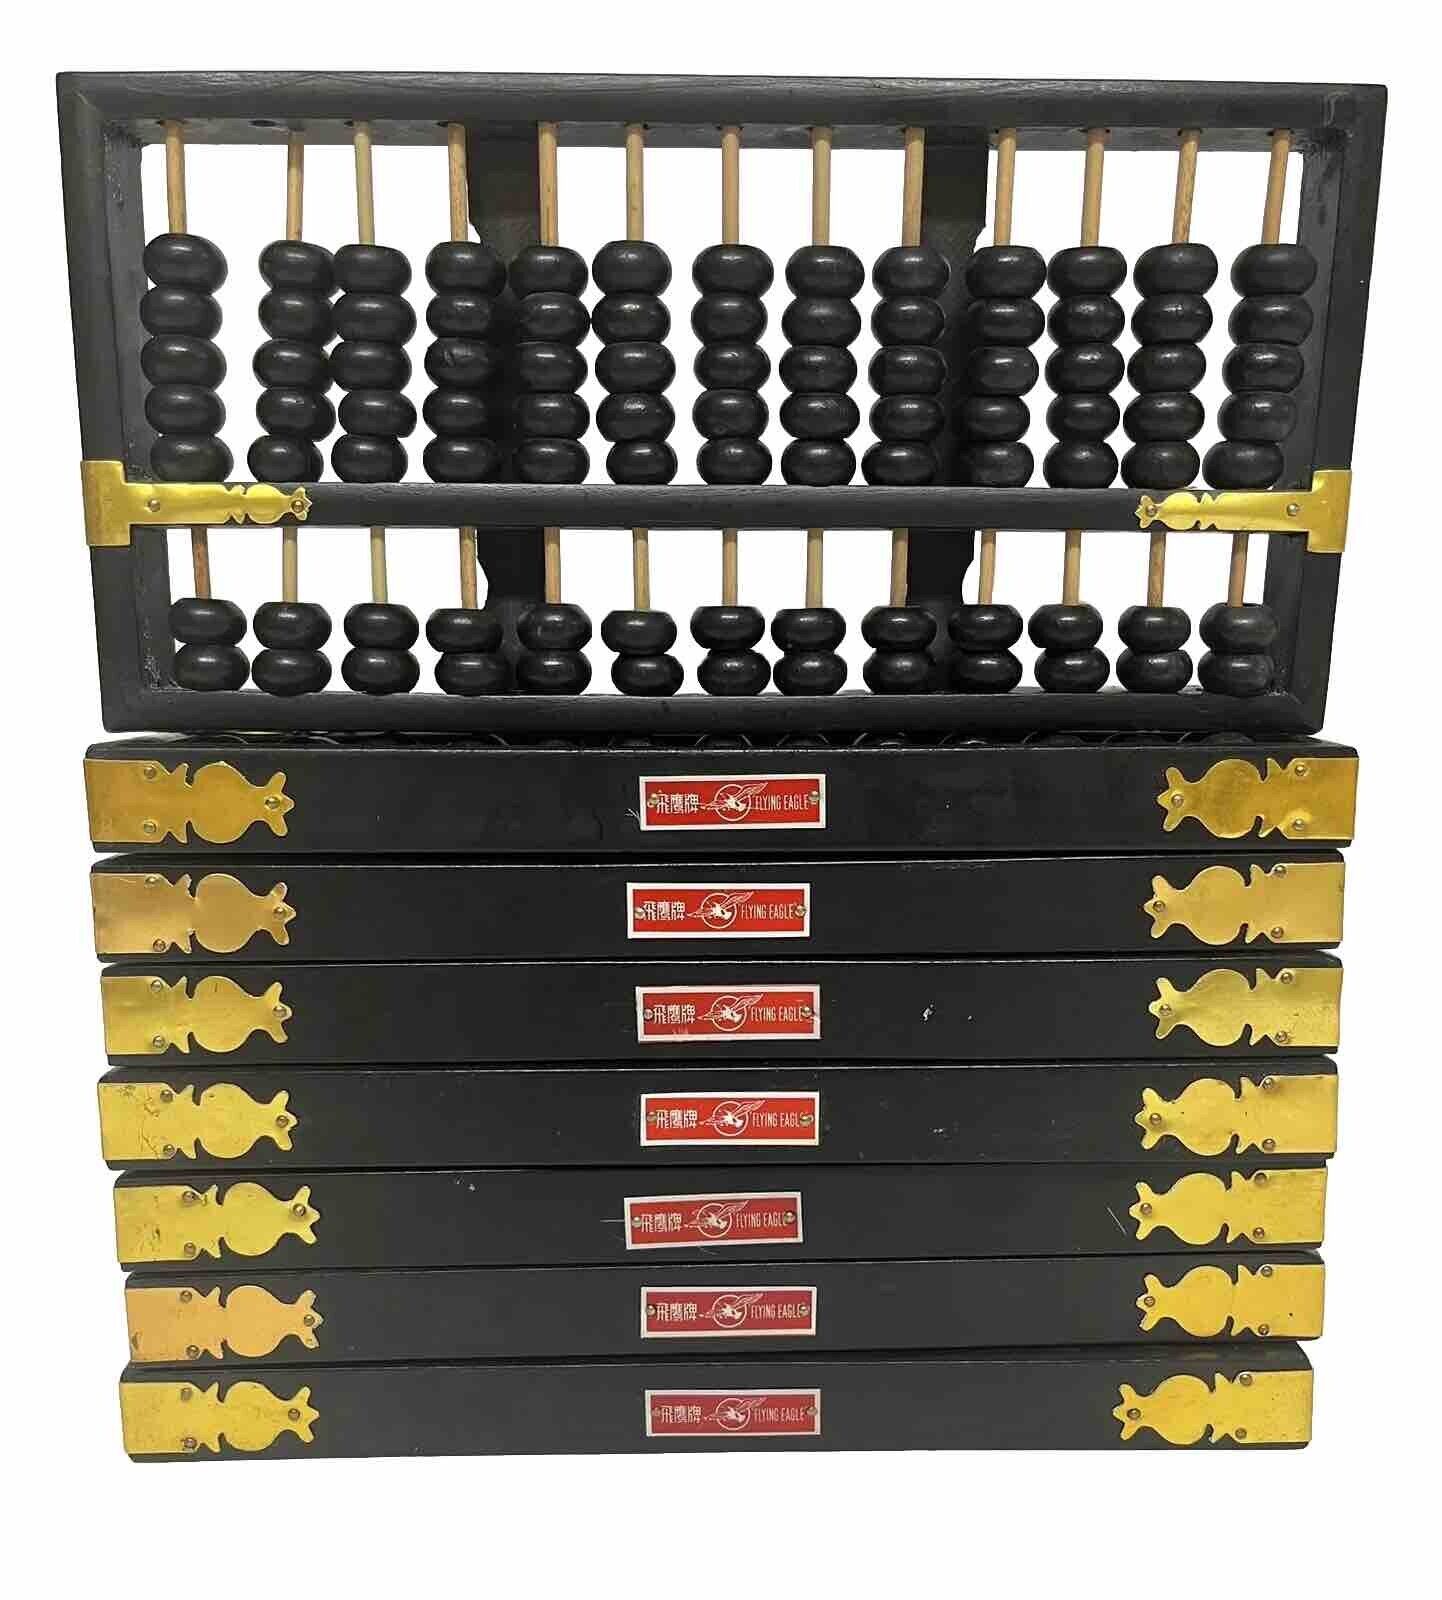 Lot 8 FLYING EAGLE ABACUS ABACUSES Black Wood Beads and Gold Metal Corners 11x5\